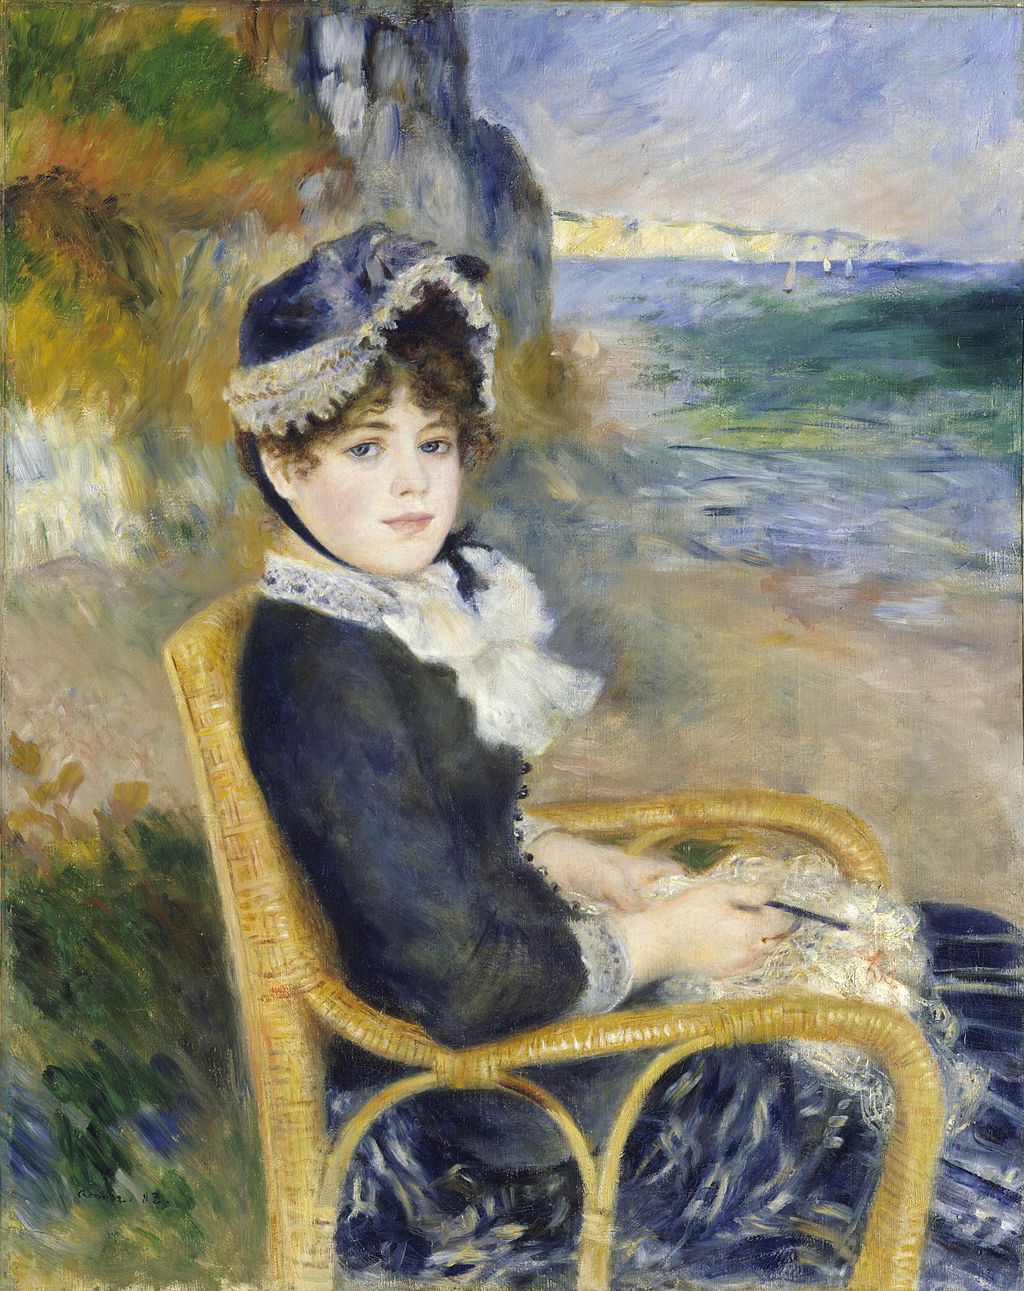 By the Seashore by Pierre-Auguste Renoir Reproduction for Sale by Blue Surf Art